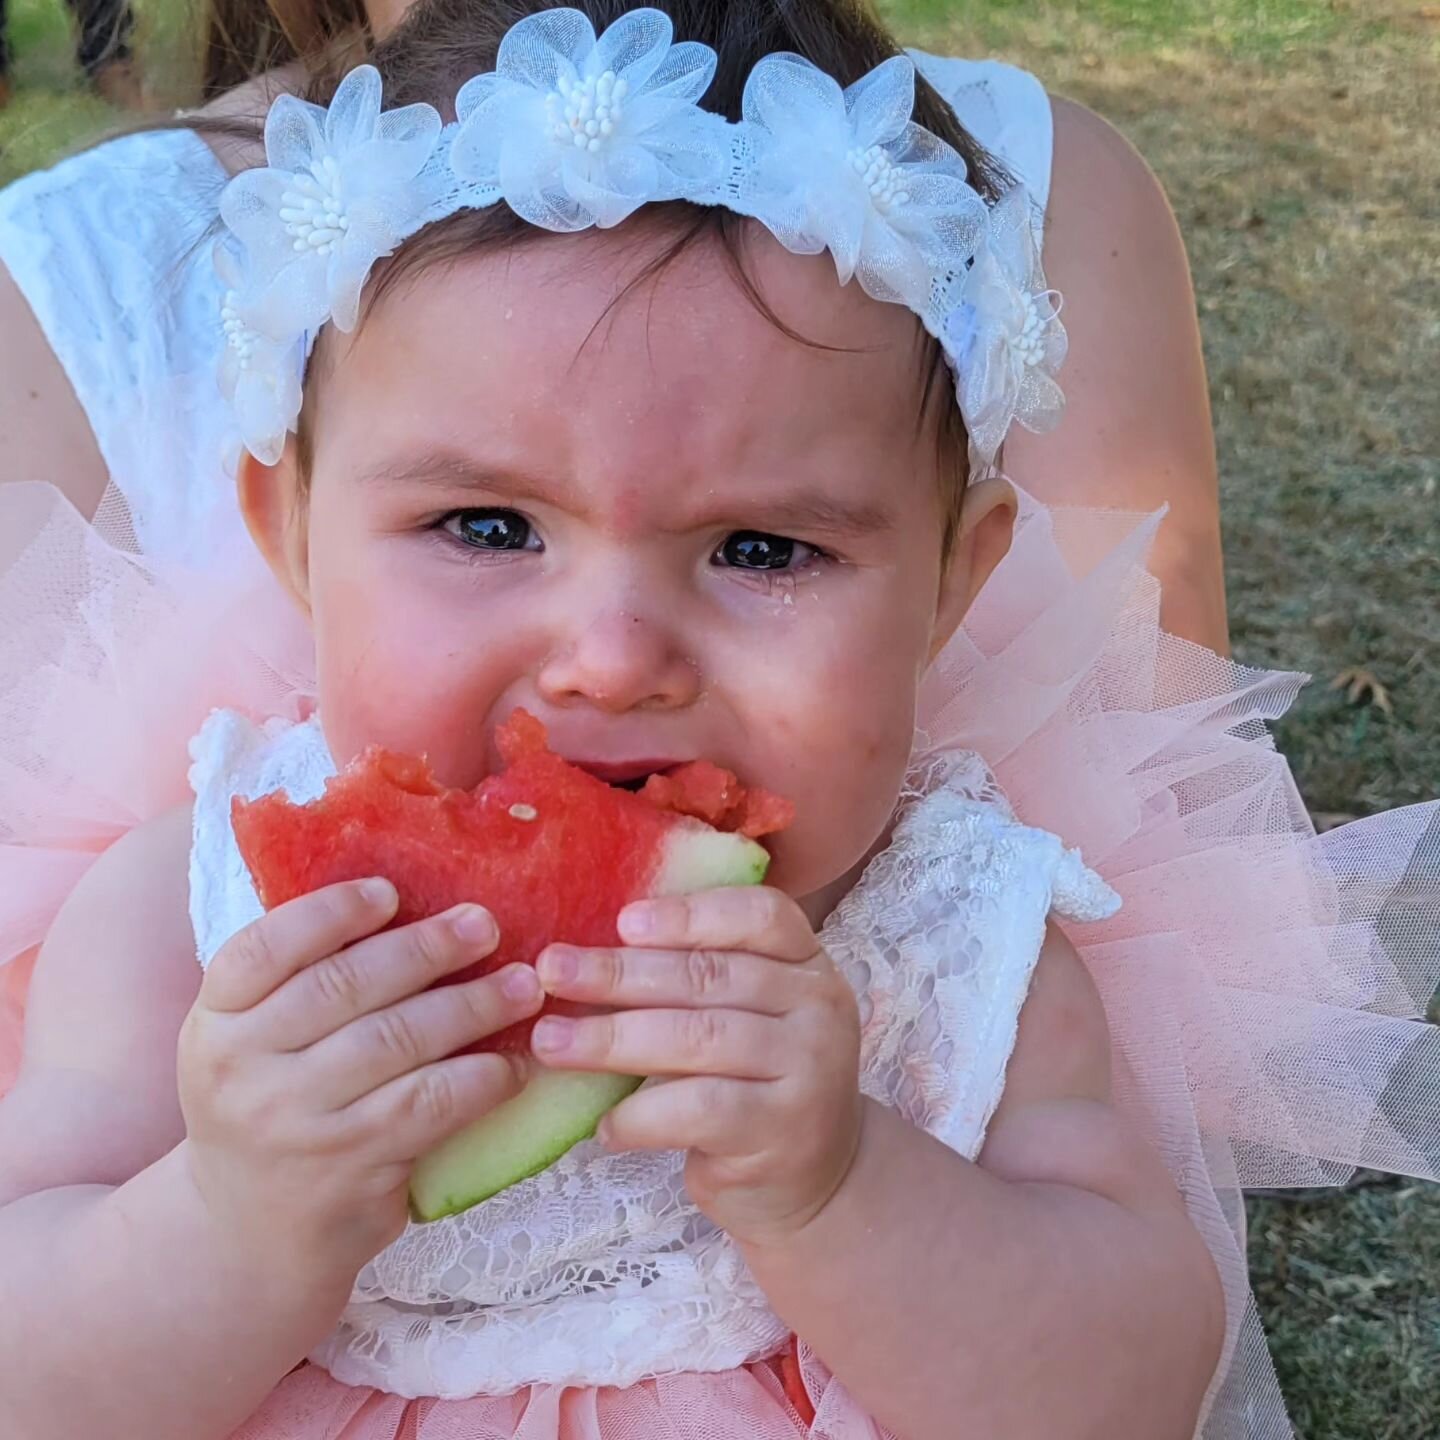 When Daddy, the Groom, forgets the dummy for his adorable Flowergirl .... watermelon doesn't really cut it! 

#whereismydummy 
#watermelon 
#flowergirl 
#sweetflowergirl 
#yeslotsoftears 
#nothappydad